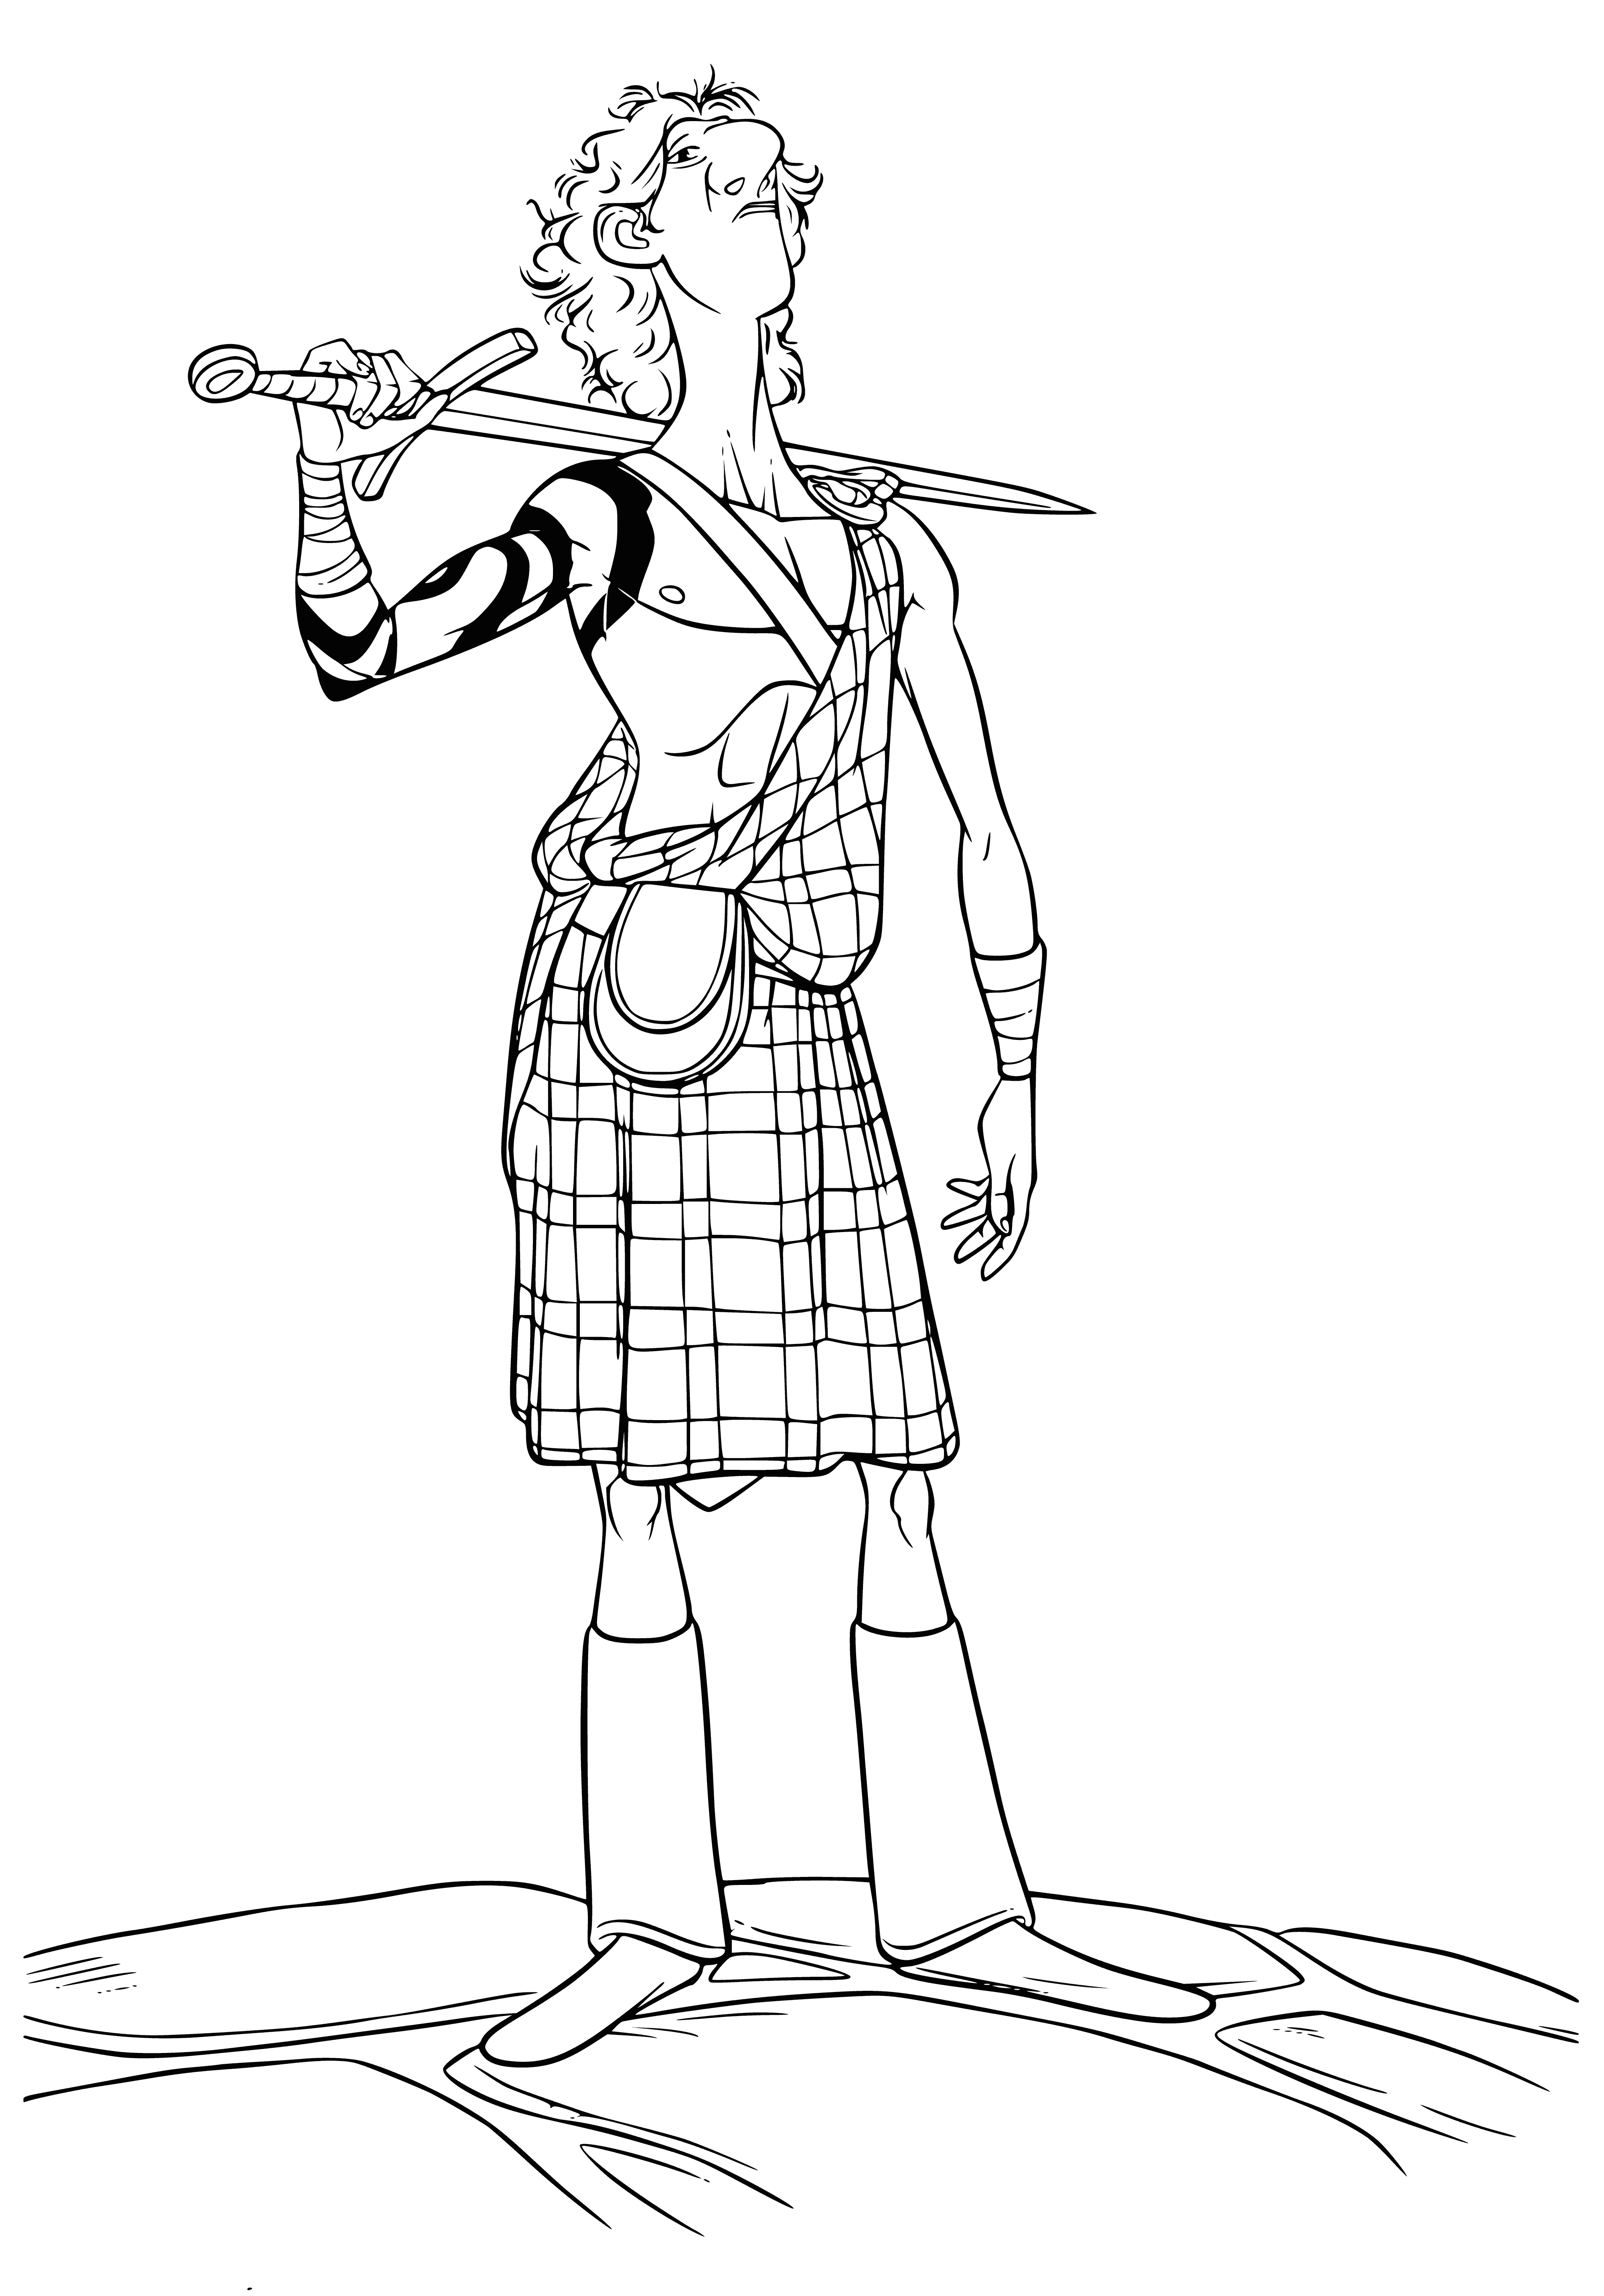 Son of Lord Mackintosh coloring page